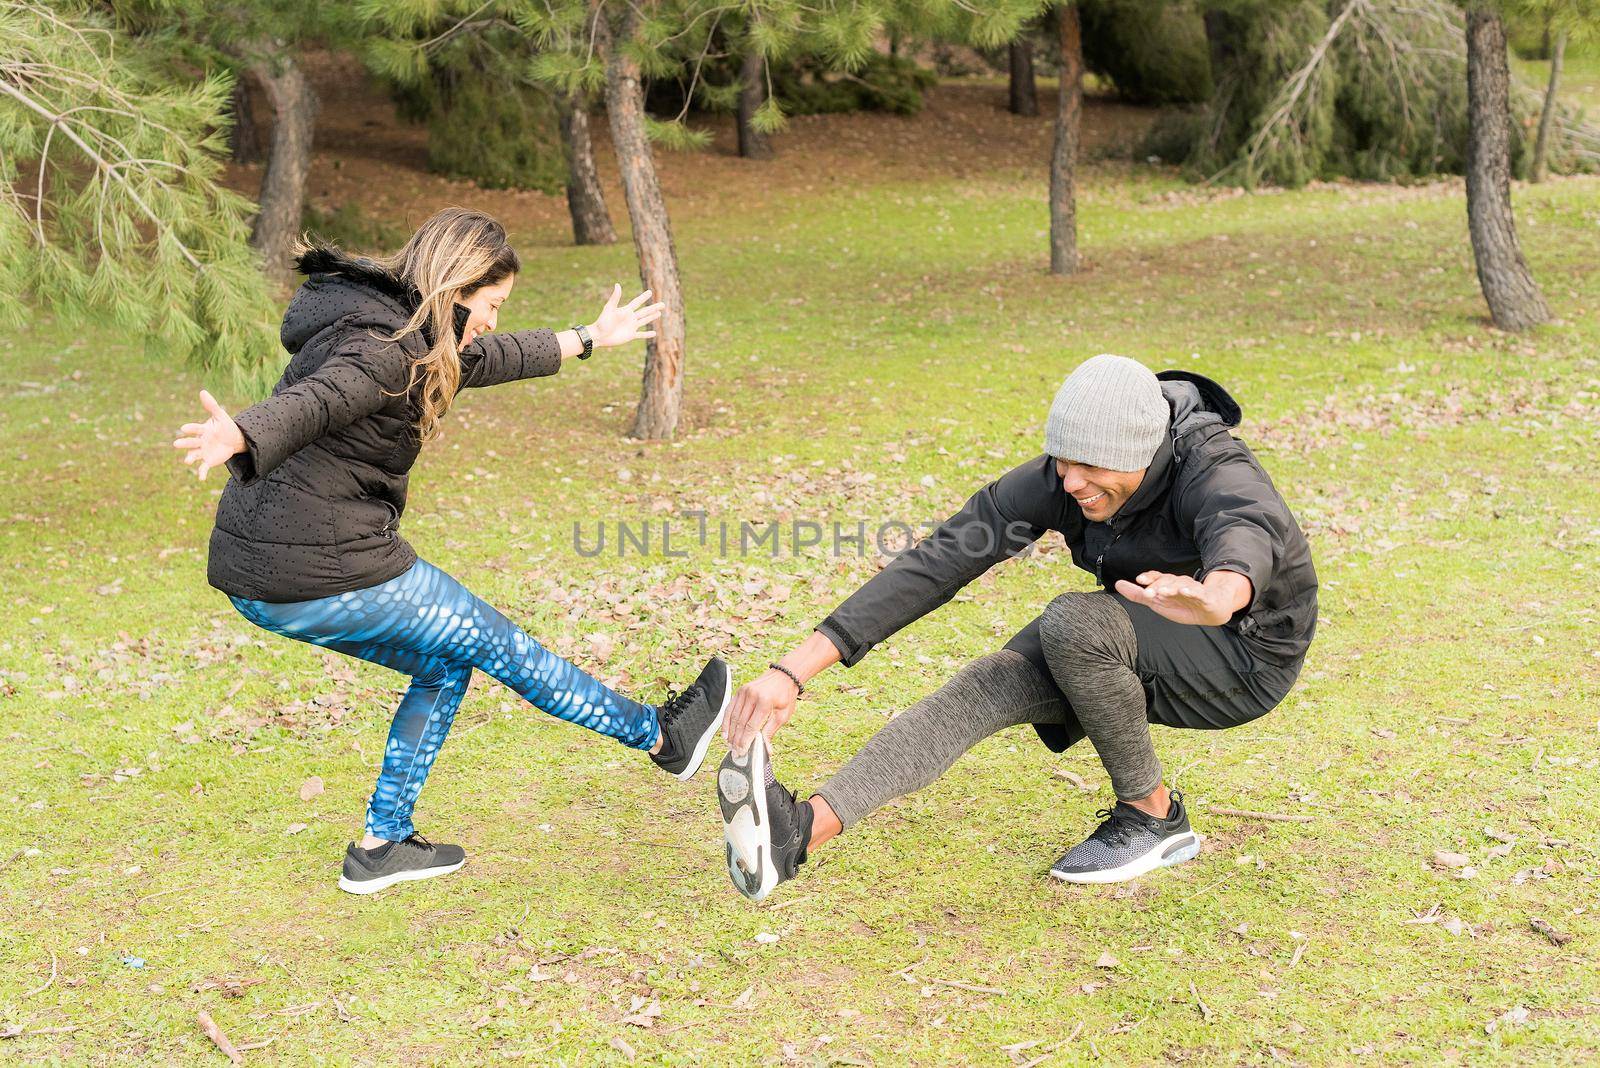 Fitness couple in warm clothes standing on one leg and stretching the other. Multi-ethnic couple outdoors.